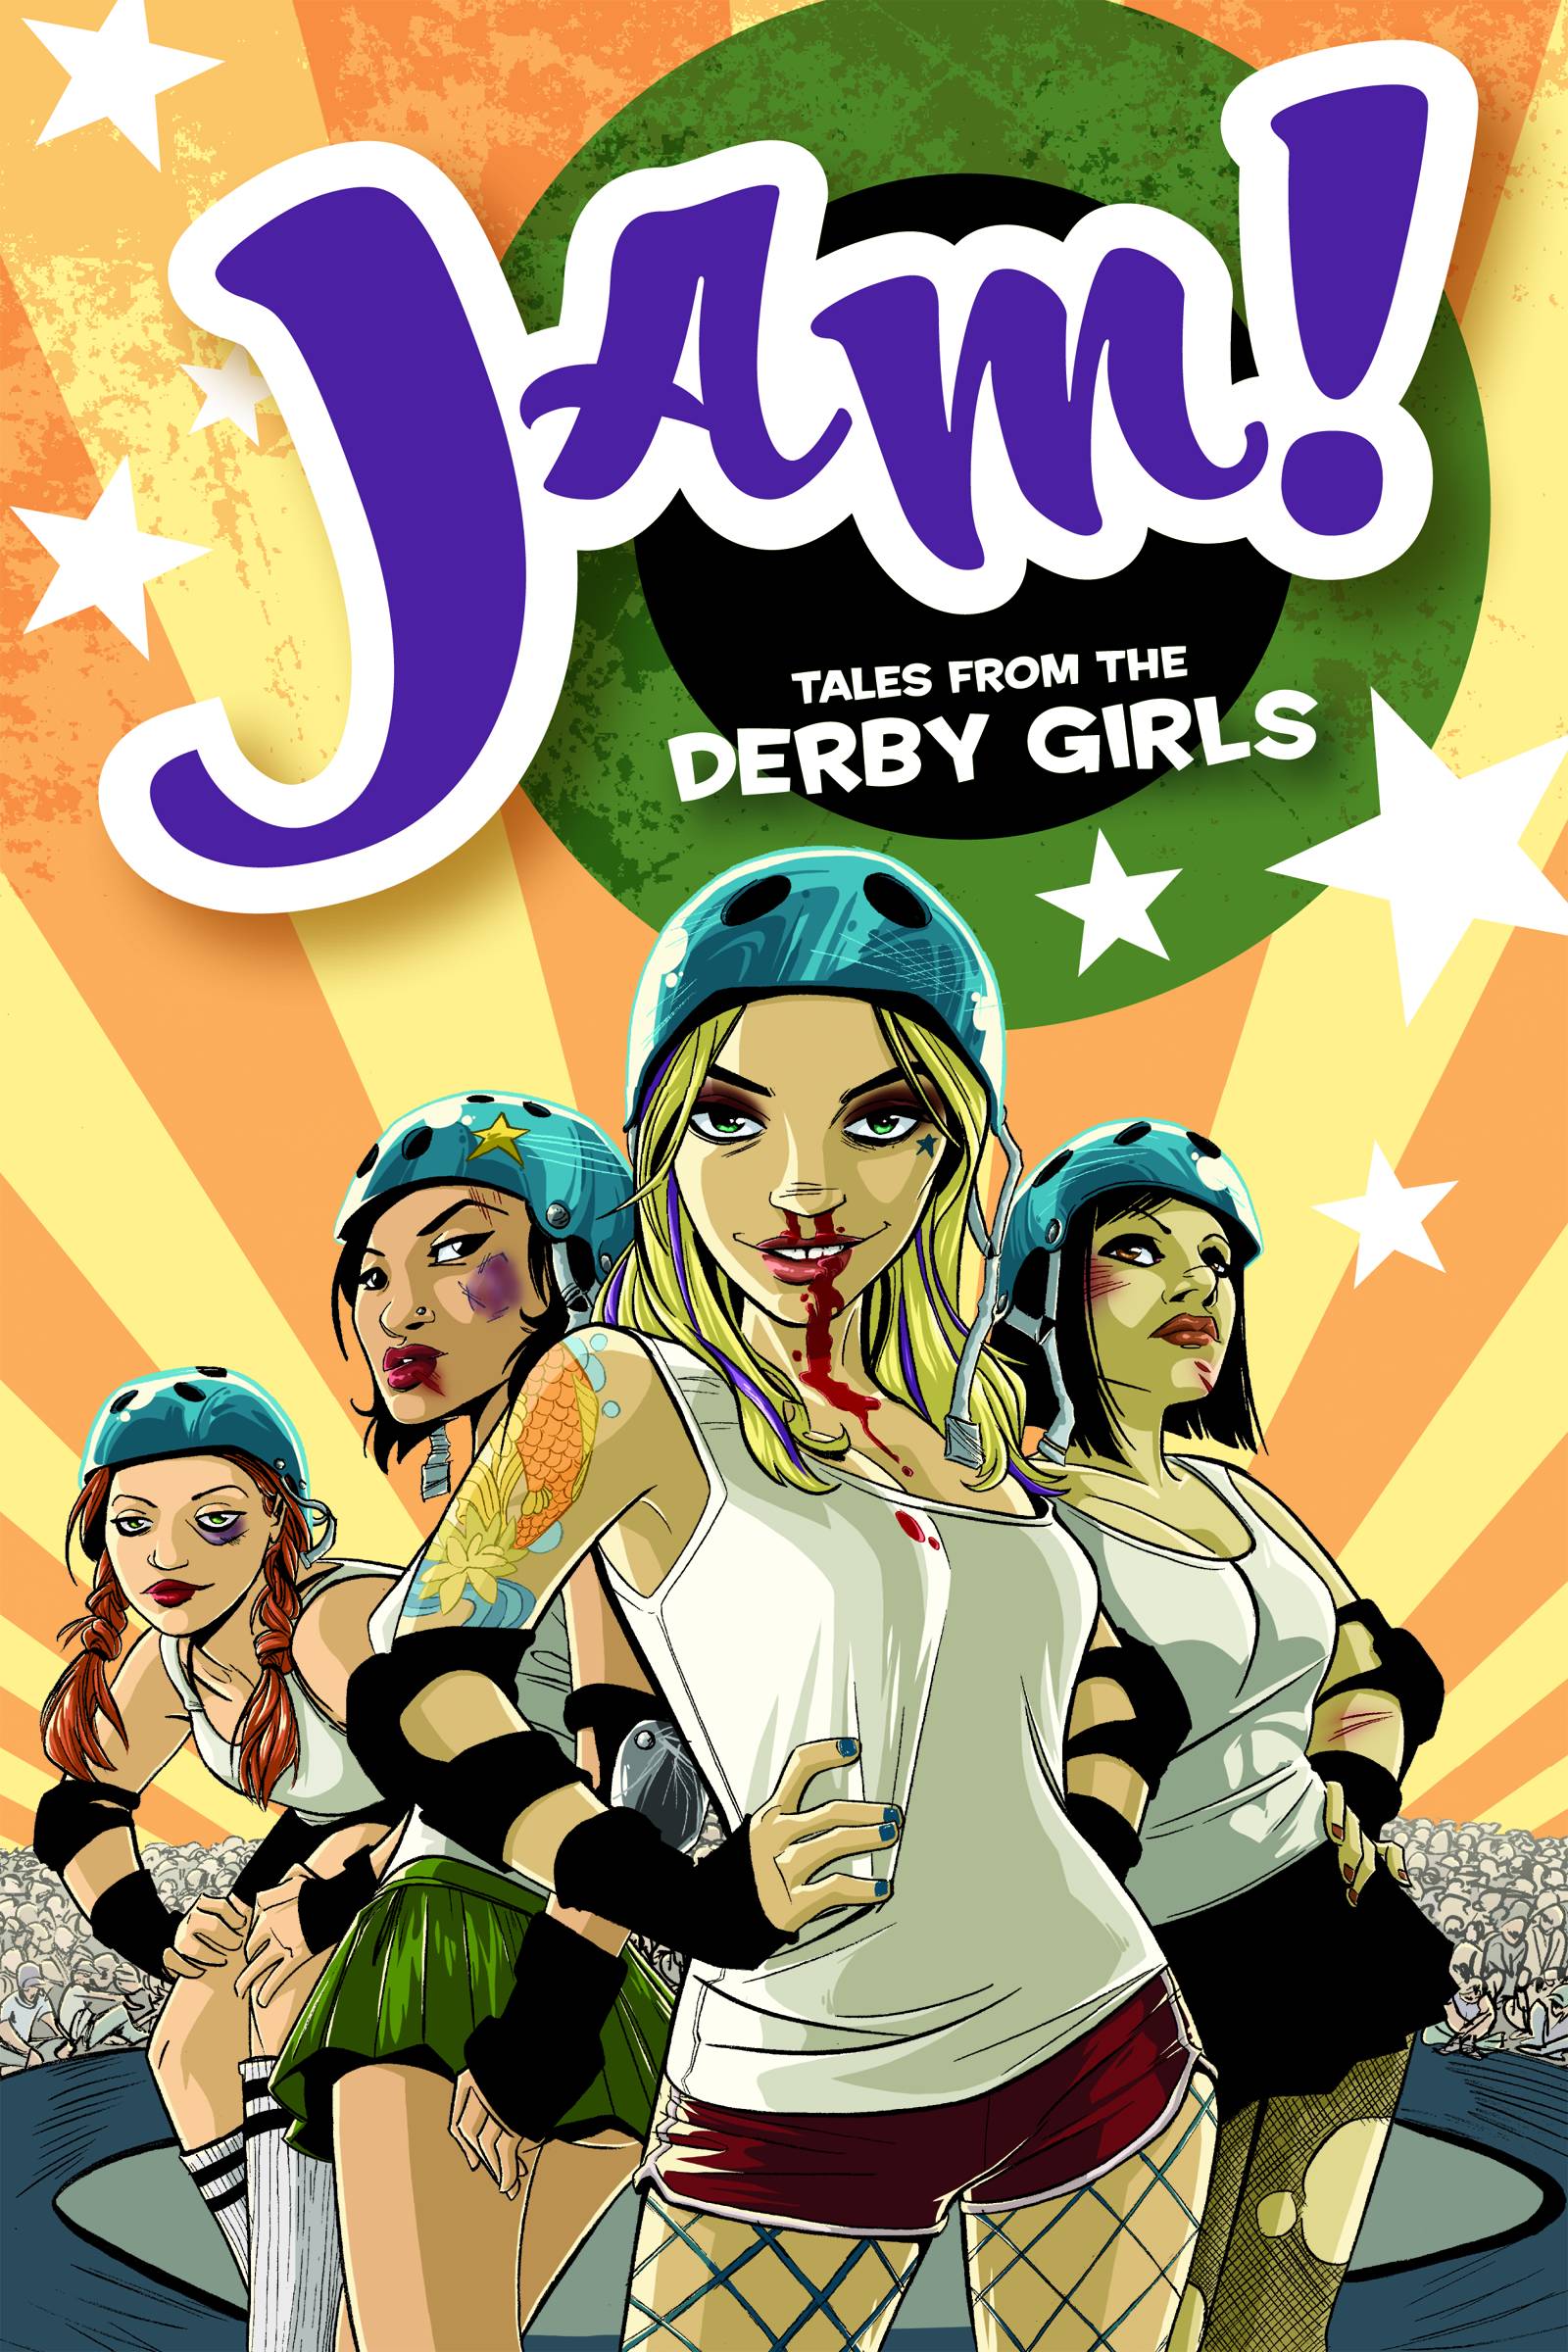 Jam Tales From The World of Roller Derby Graphic Novel